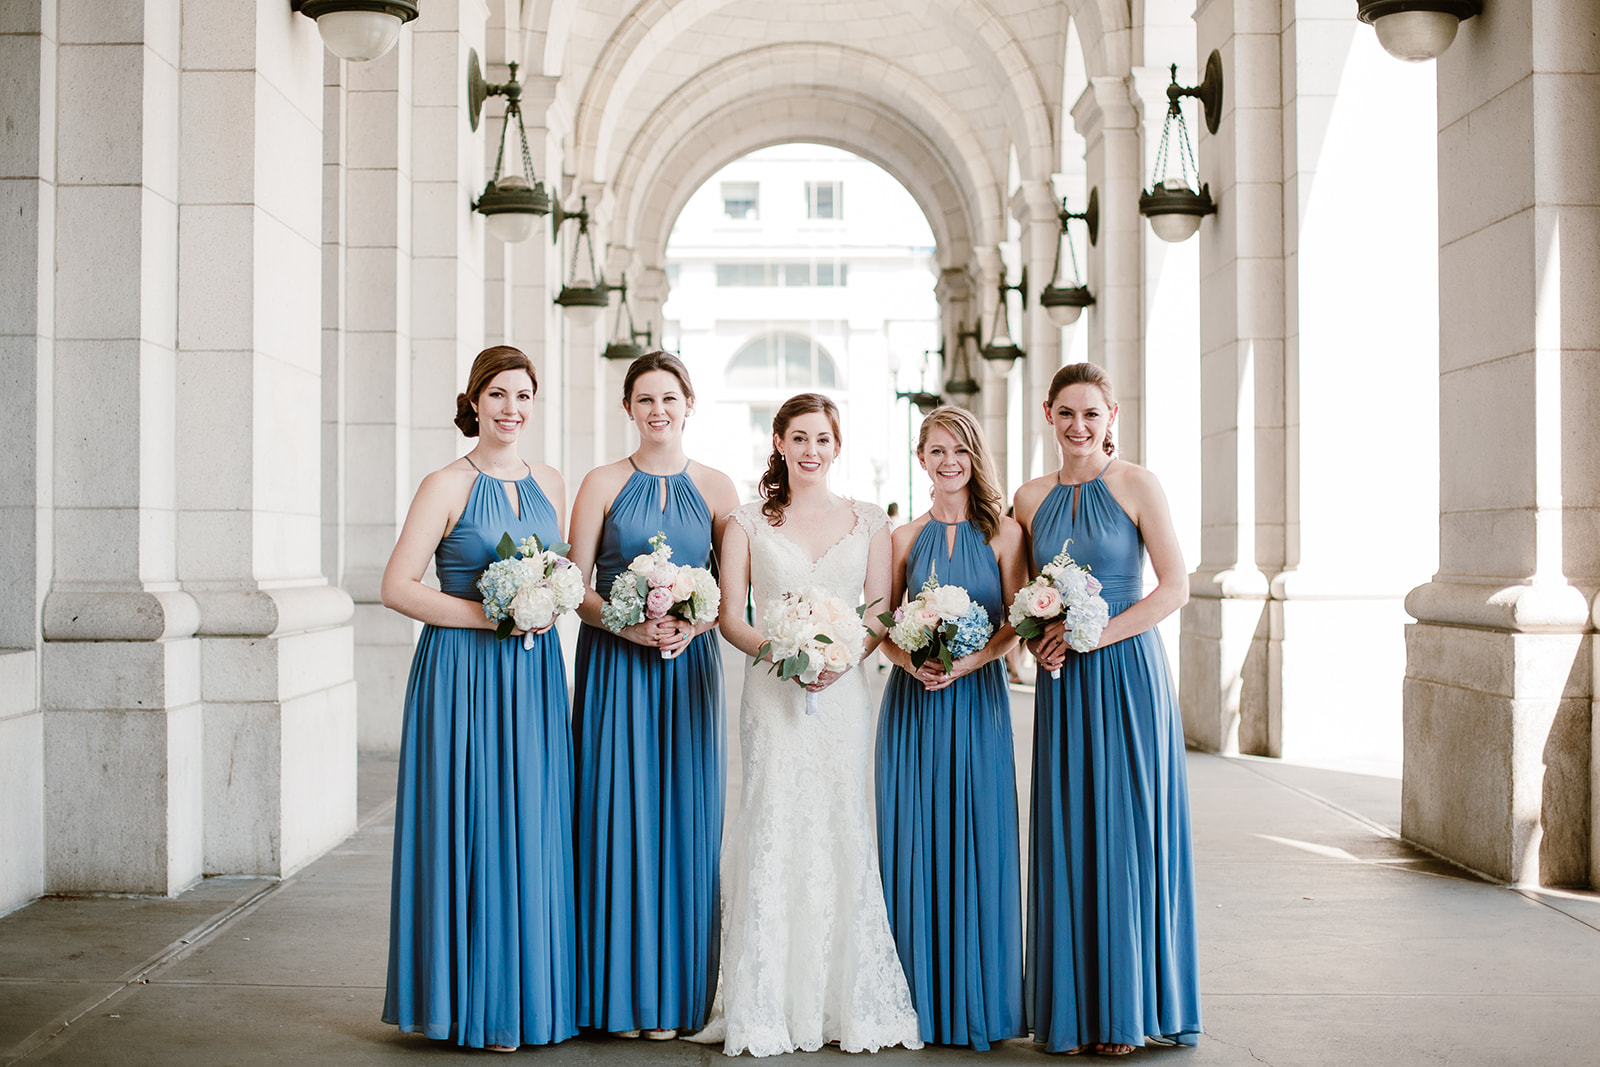  Wedding party portraits at Union Station in Washington D.C. Irish wedding with green and gold accents. Sarah Mattozzi Photography. 